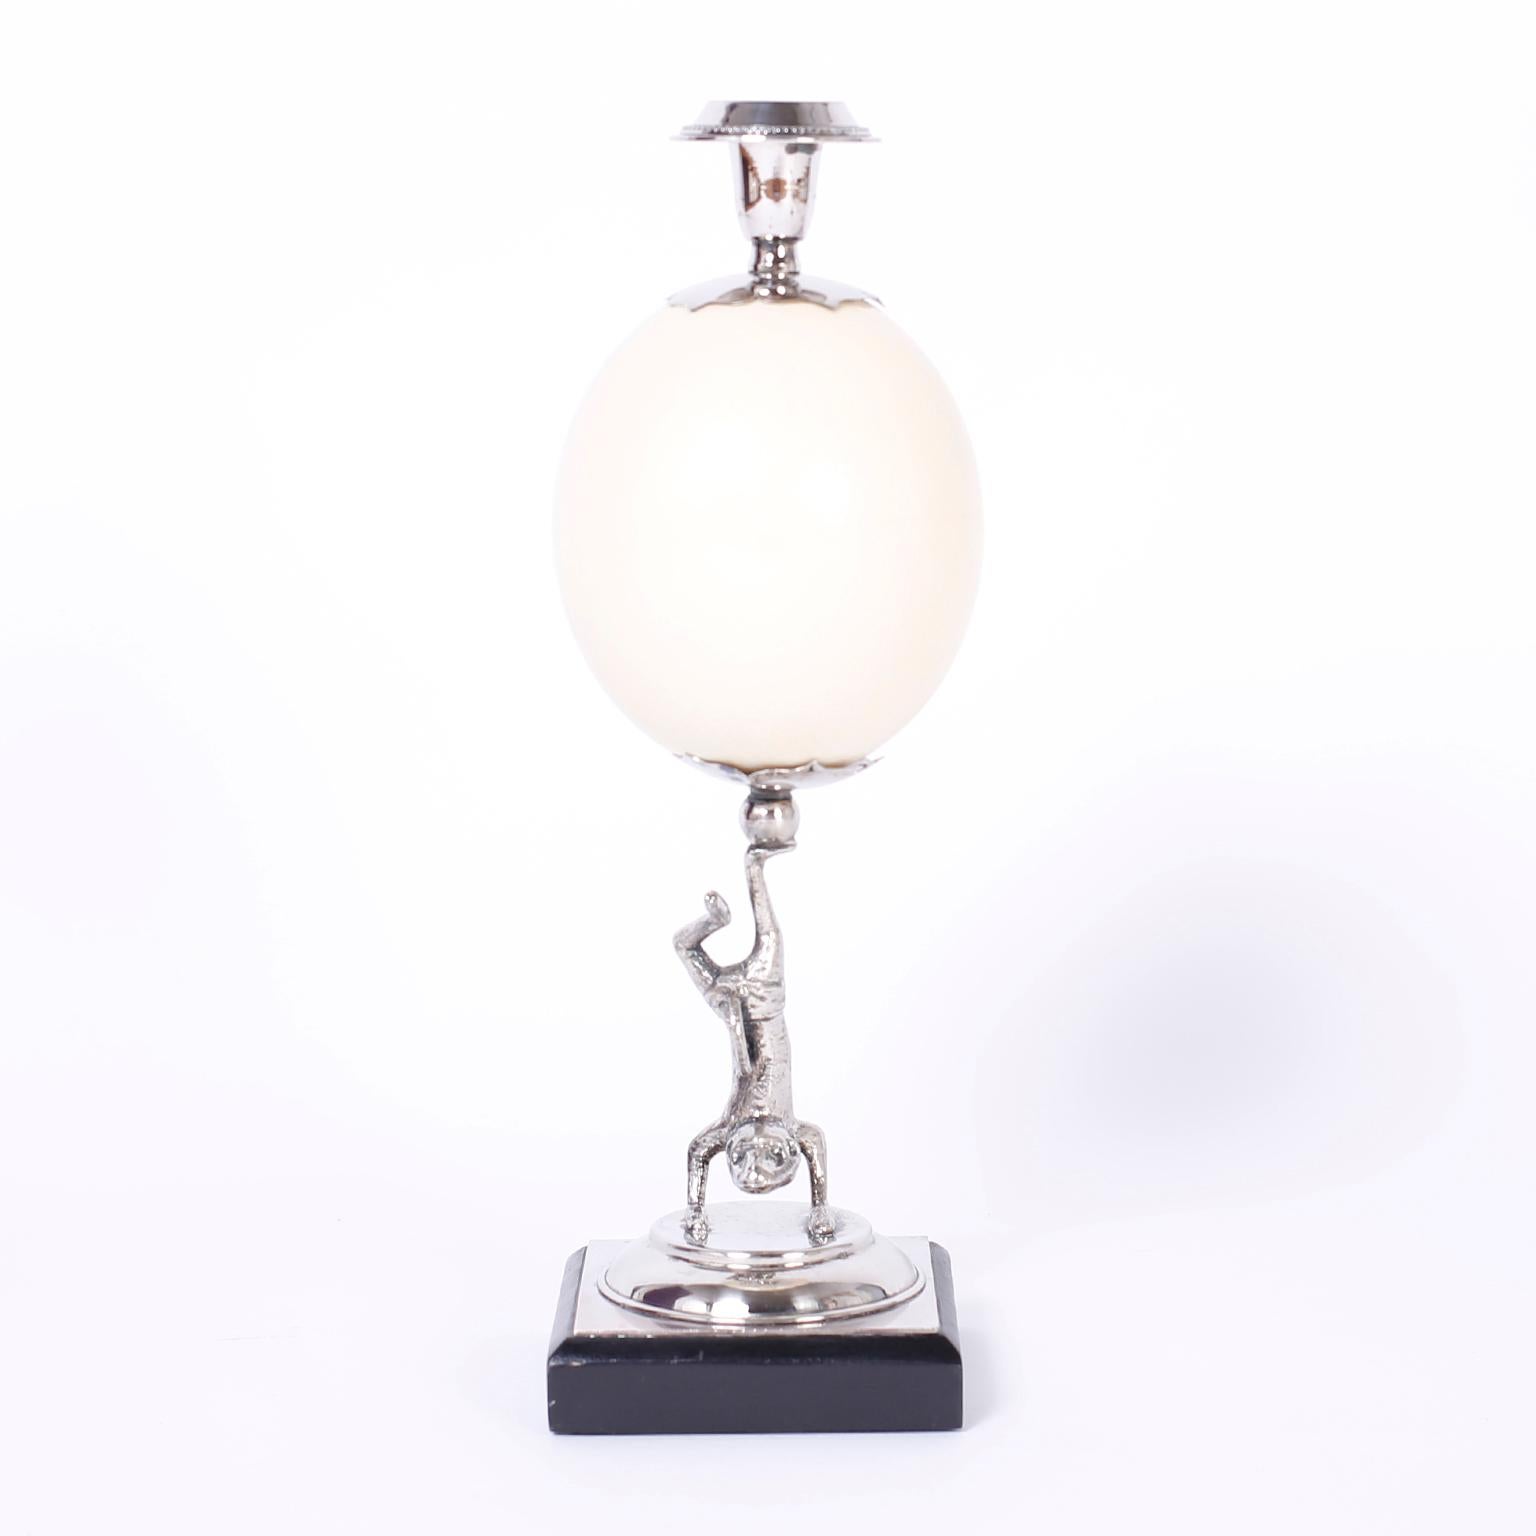 Whimsical yet refined pair of candlesticks with silvered metal acrobatic lizards holding ostrich eggs with candle holders on a classic base stamped Redmile London.